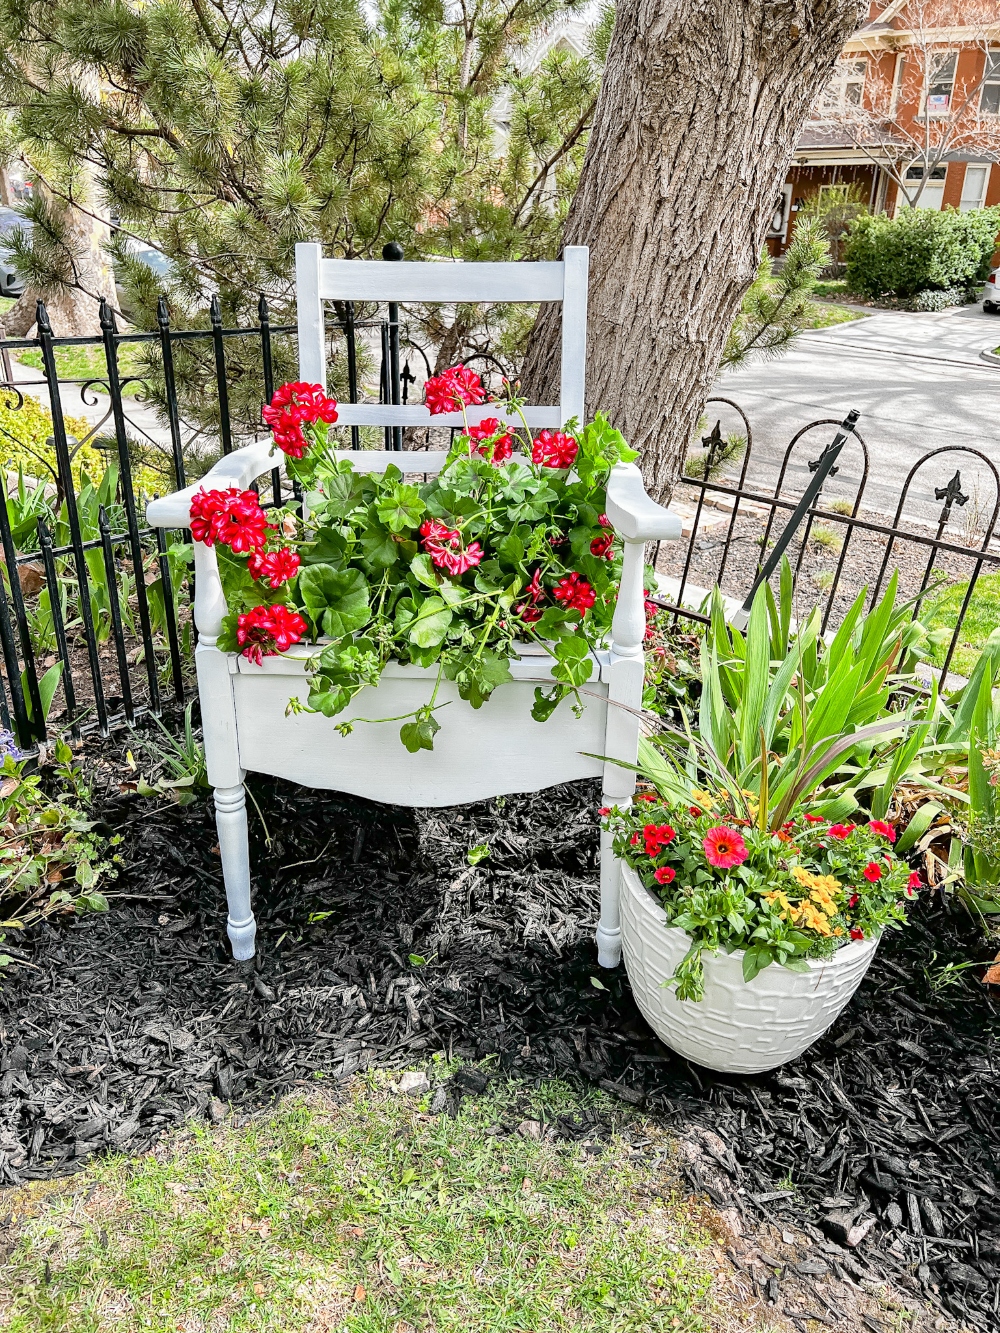 Spring DIY Upcycled Chair Planter. Take a broken chair and give it new life by planting beautiful flowers in it to enjoy in your yard!